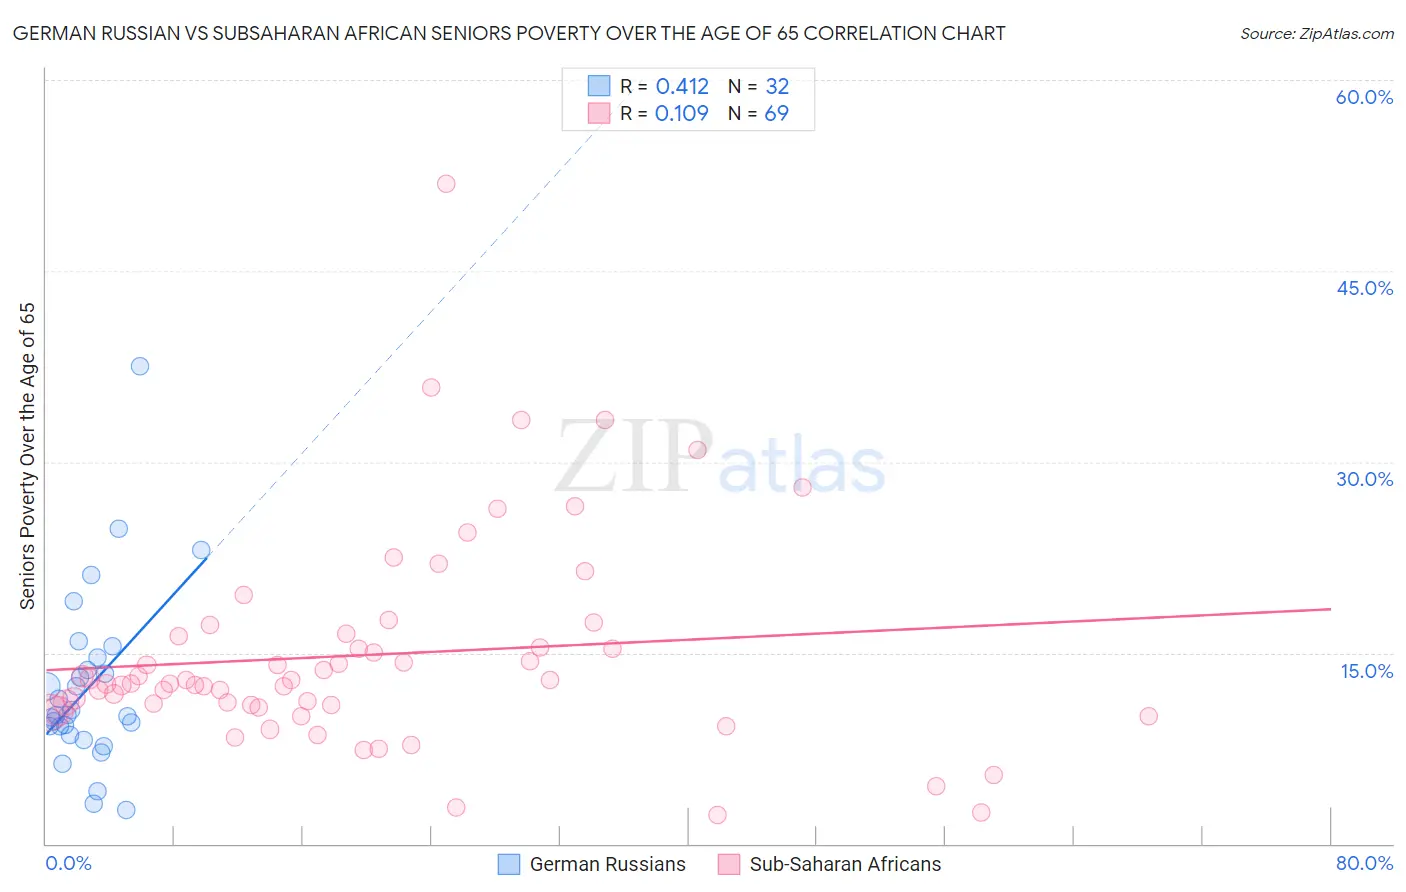 German Russian vs Subsaharan African Seniors Poverty Over the Age of 65